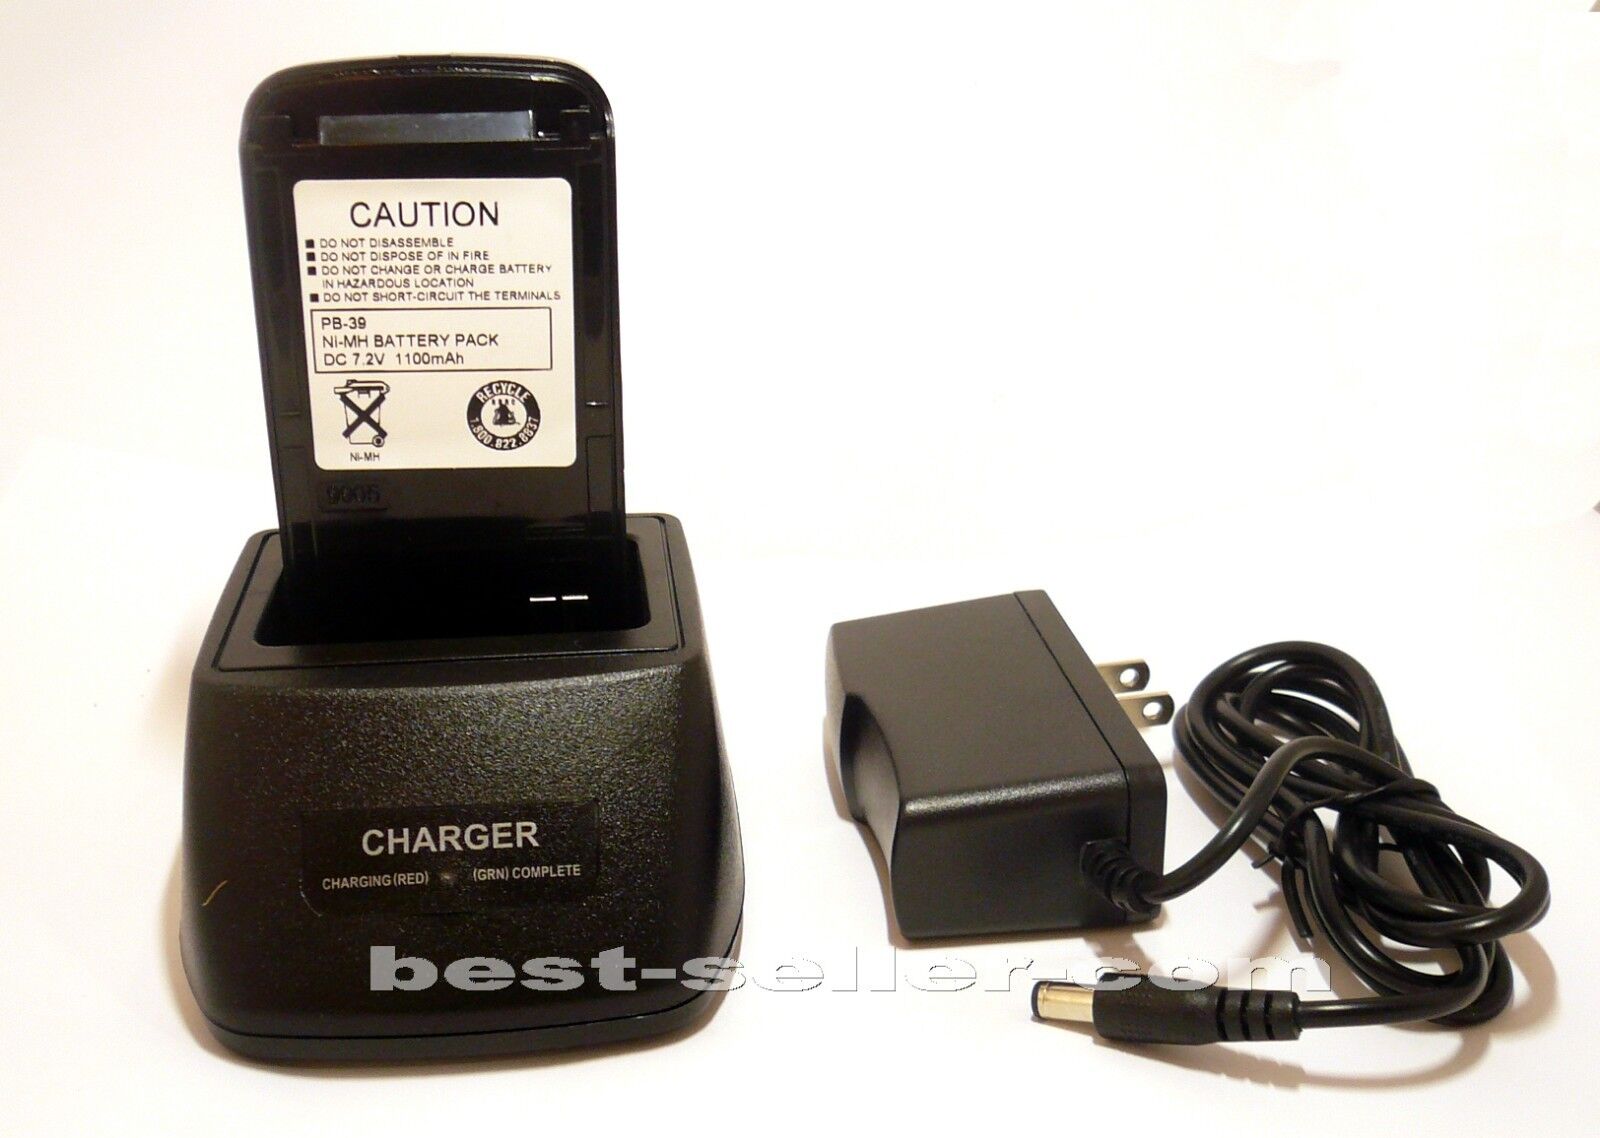 Charger+Battery PB39 for Kenwood, 1100mAh Ni-MH TH-D7,TH-D7A,TH-D7E,TH-G71 part Nowe akcje